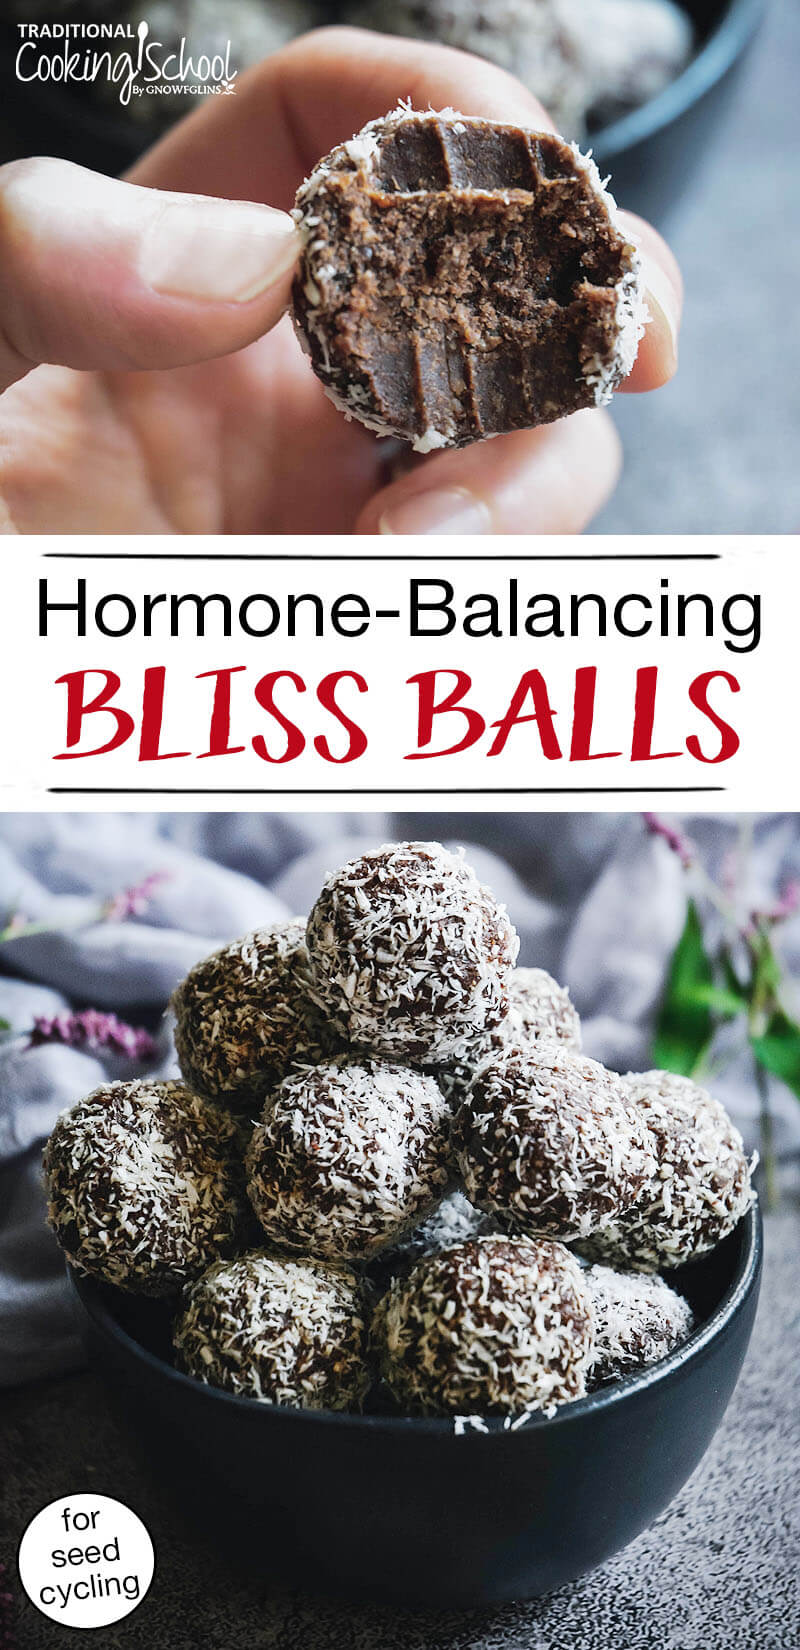 photo collage of cacao date balls covered in shredded coconut, one of which has a bite taken out of it, with text overlay, "Hormone-Balancing Bliss Balls For Seed Cycling"